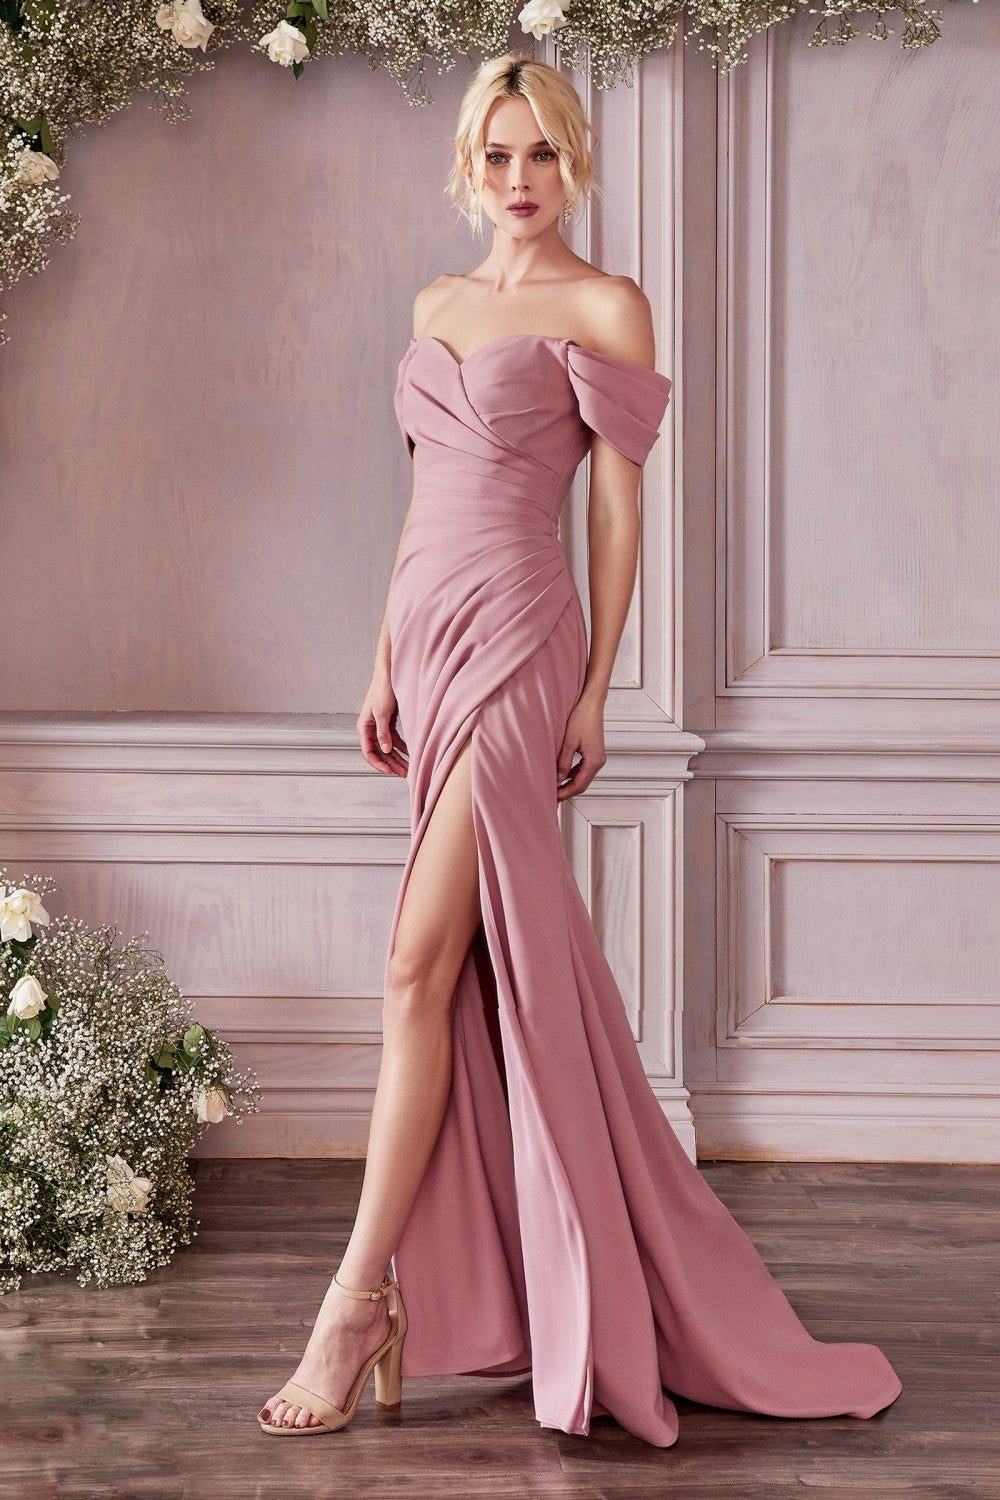 Crepe Off the Shoulder Dress Formal Prom Dress with a Leg Slit & Thin Straps CDKV1057 Elsy Style Evening Dress